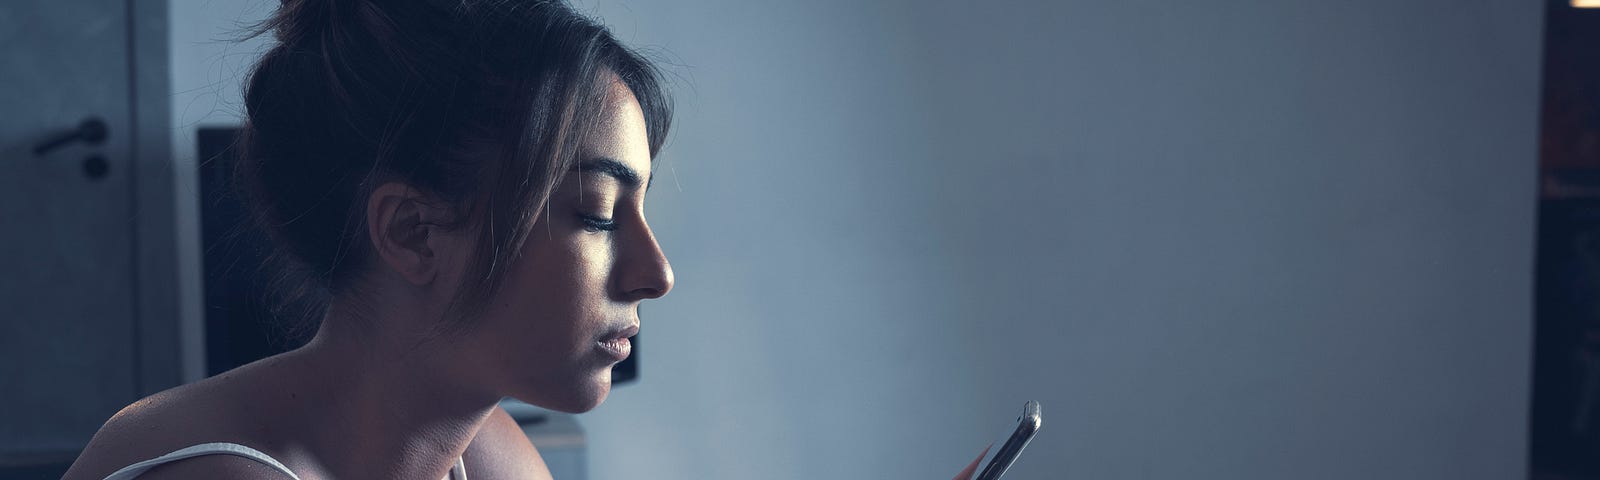 A woman holding a cell phone sexting with someone while looking depressed